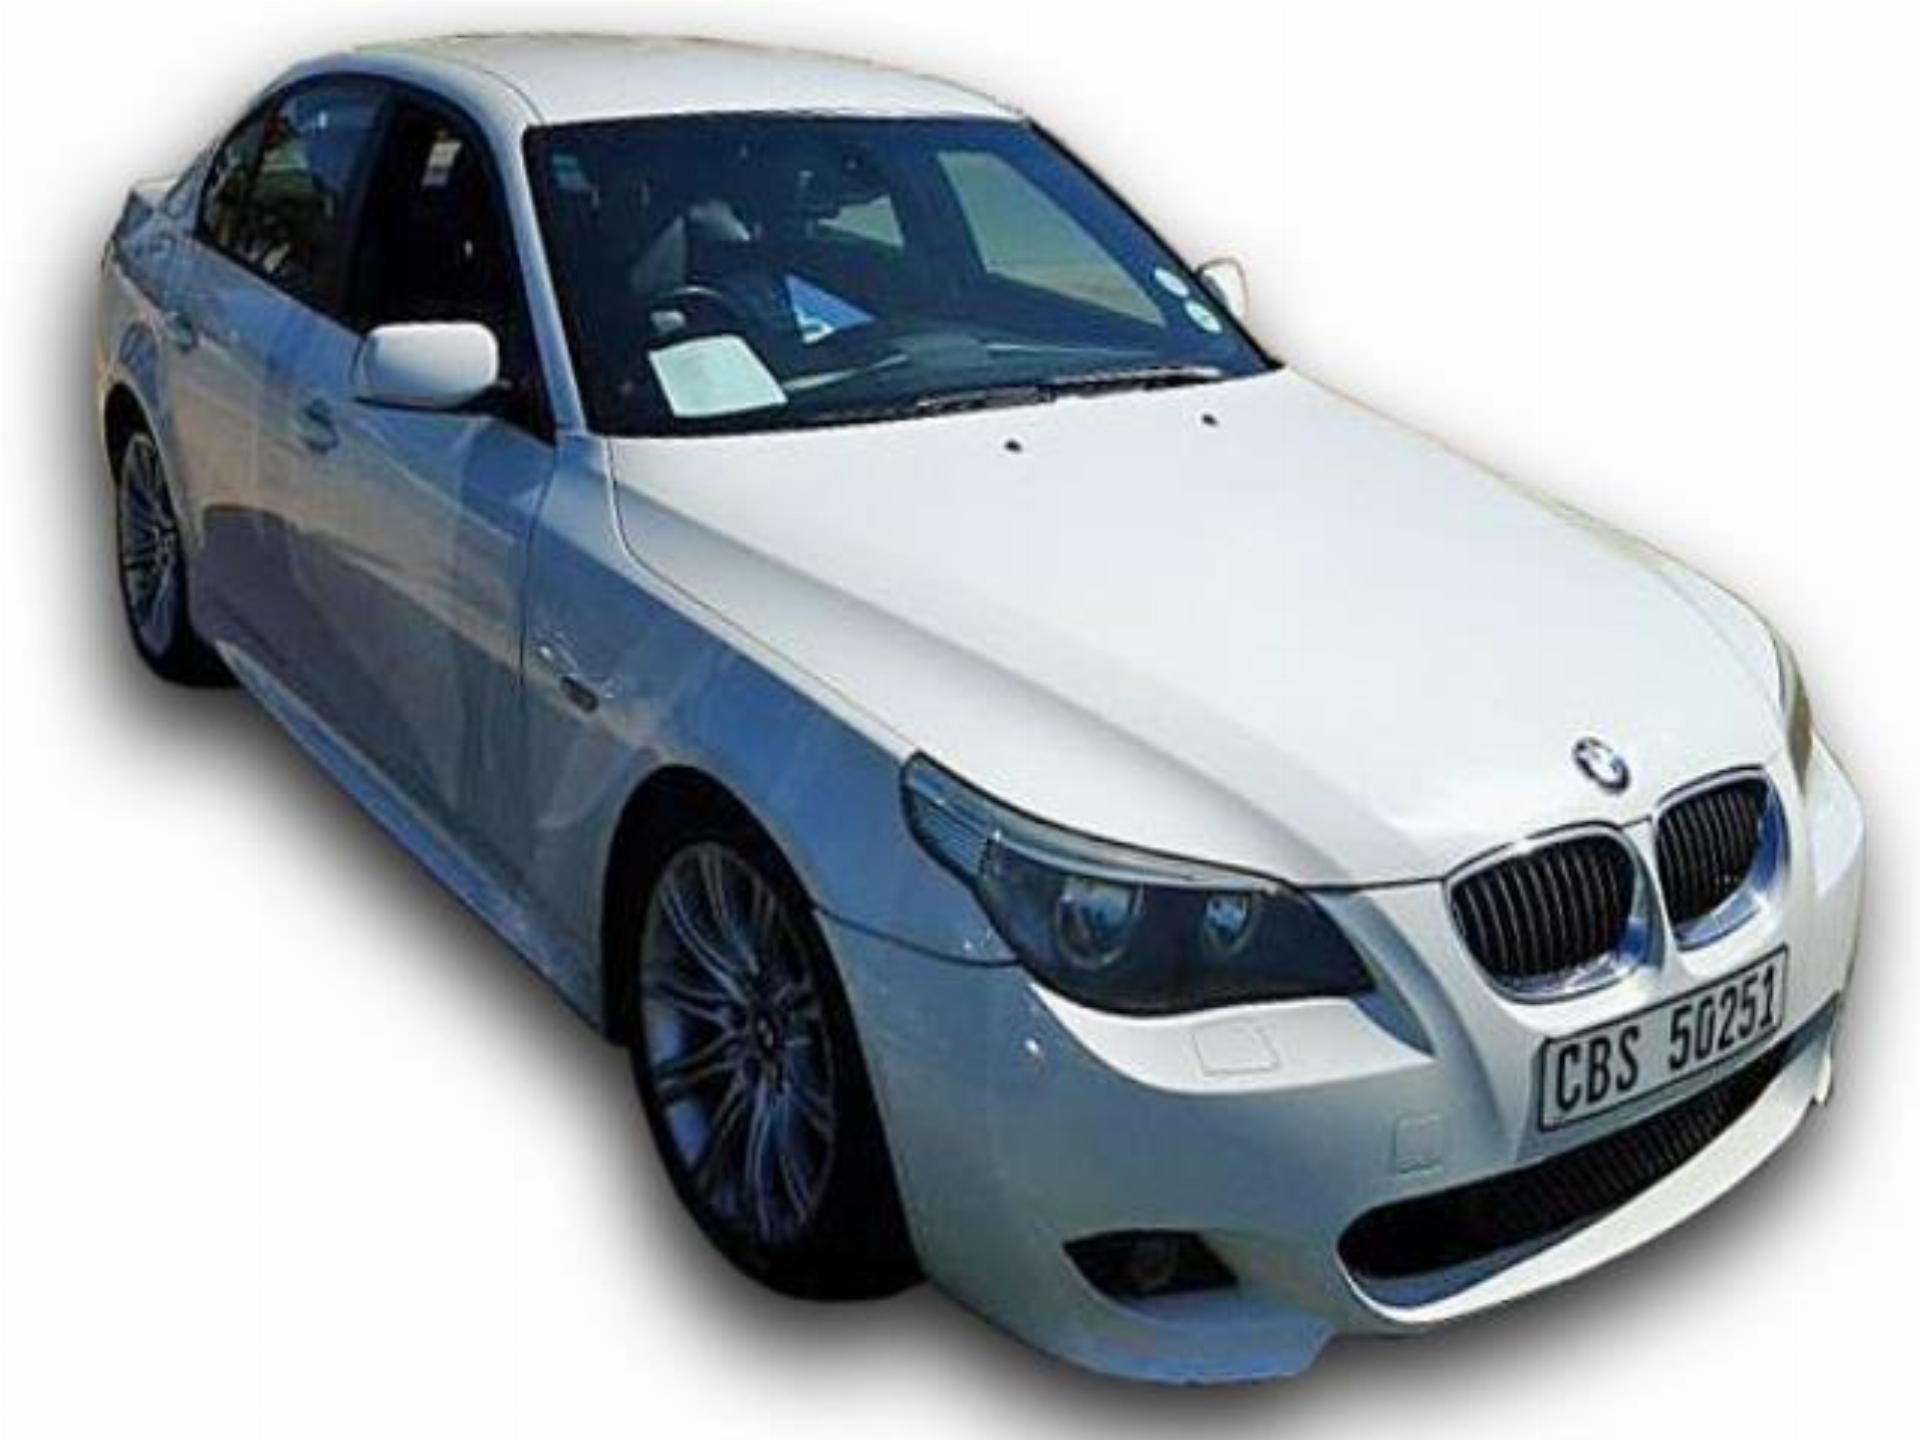 Used BMW 5 Series 523I (E60) 2006 on auction PV1010804